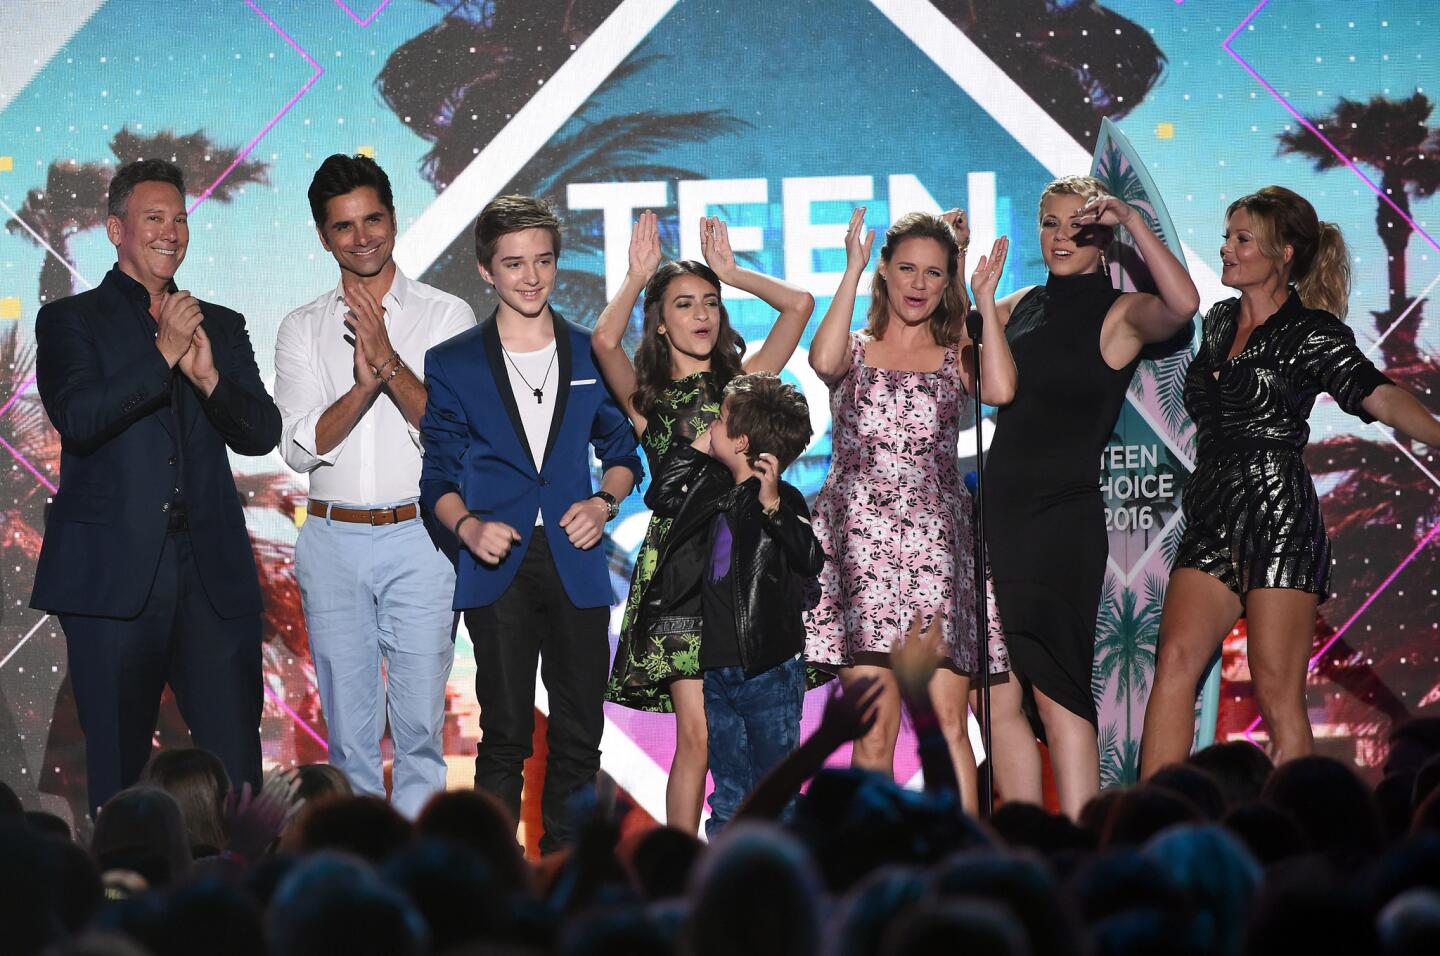 Writer/producer Jeff Franklin, from left, and actors John Stamos, Michael Campion, Soni Nicole Bringas, Elias Harger, Andrea Barber, Jodie Sweetin and Candace Cameron Bure accept the Choice TV Comedy award for "Fuller House" at the Teen Choice Awards 2016 at the Forum in Inglewood.